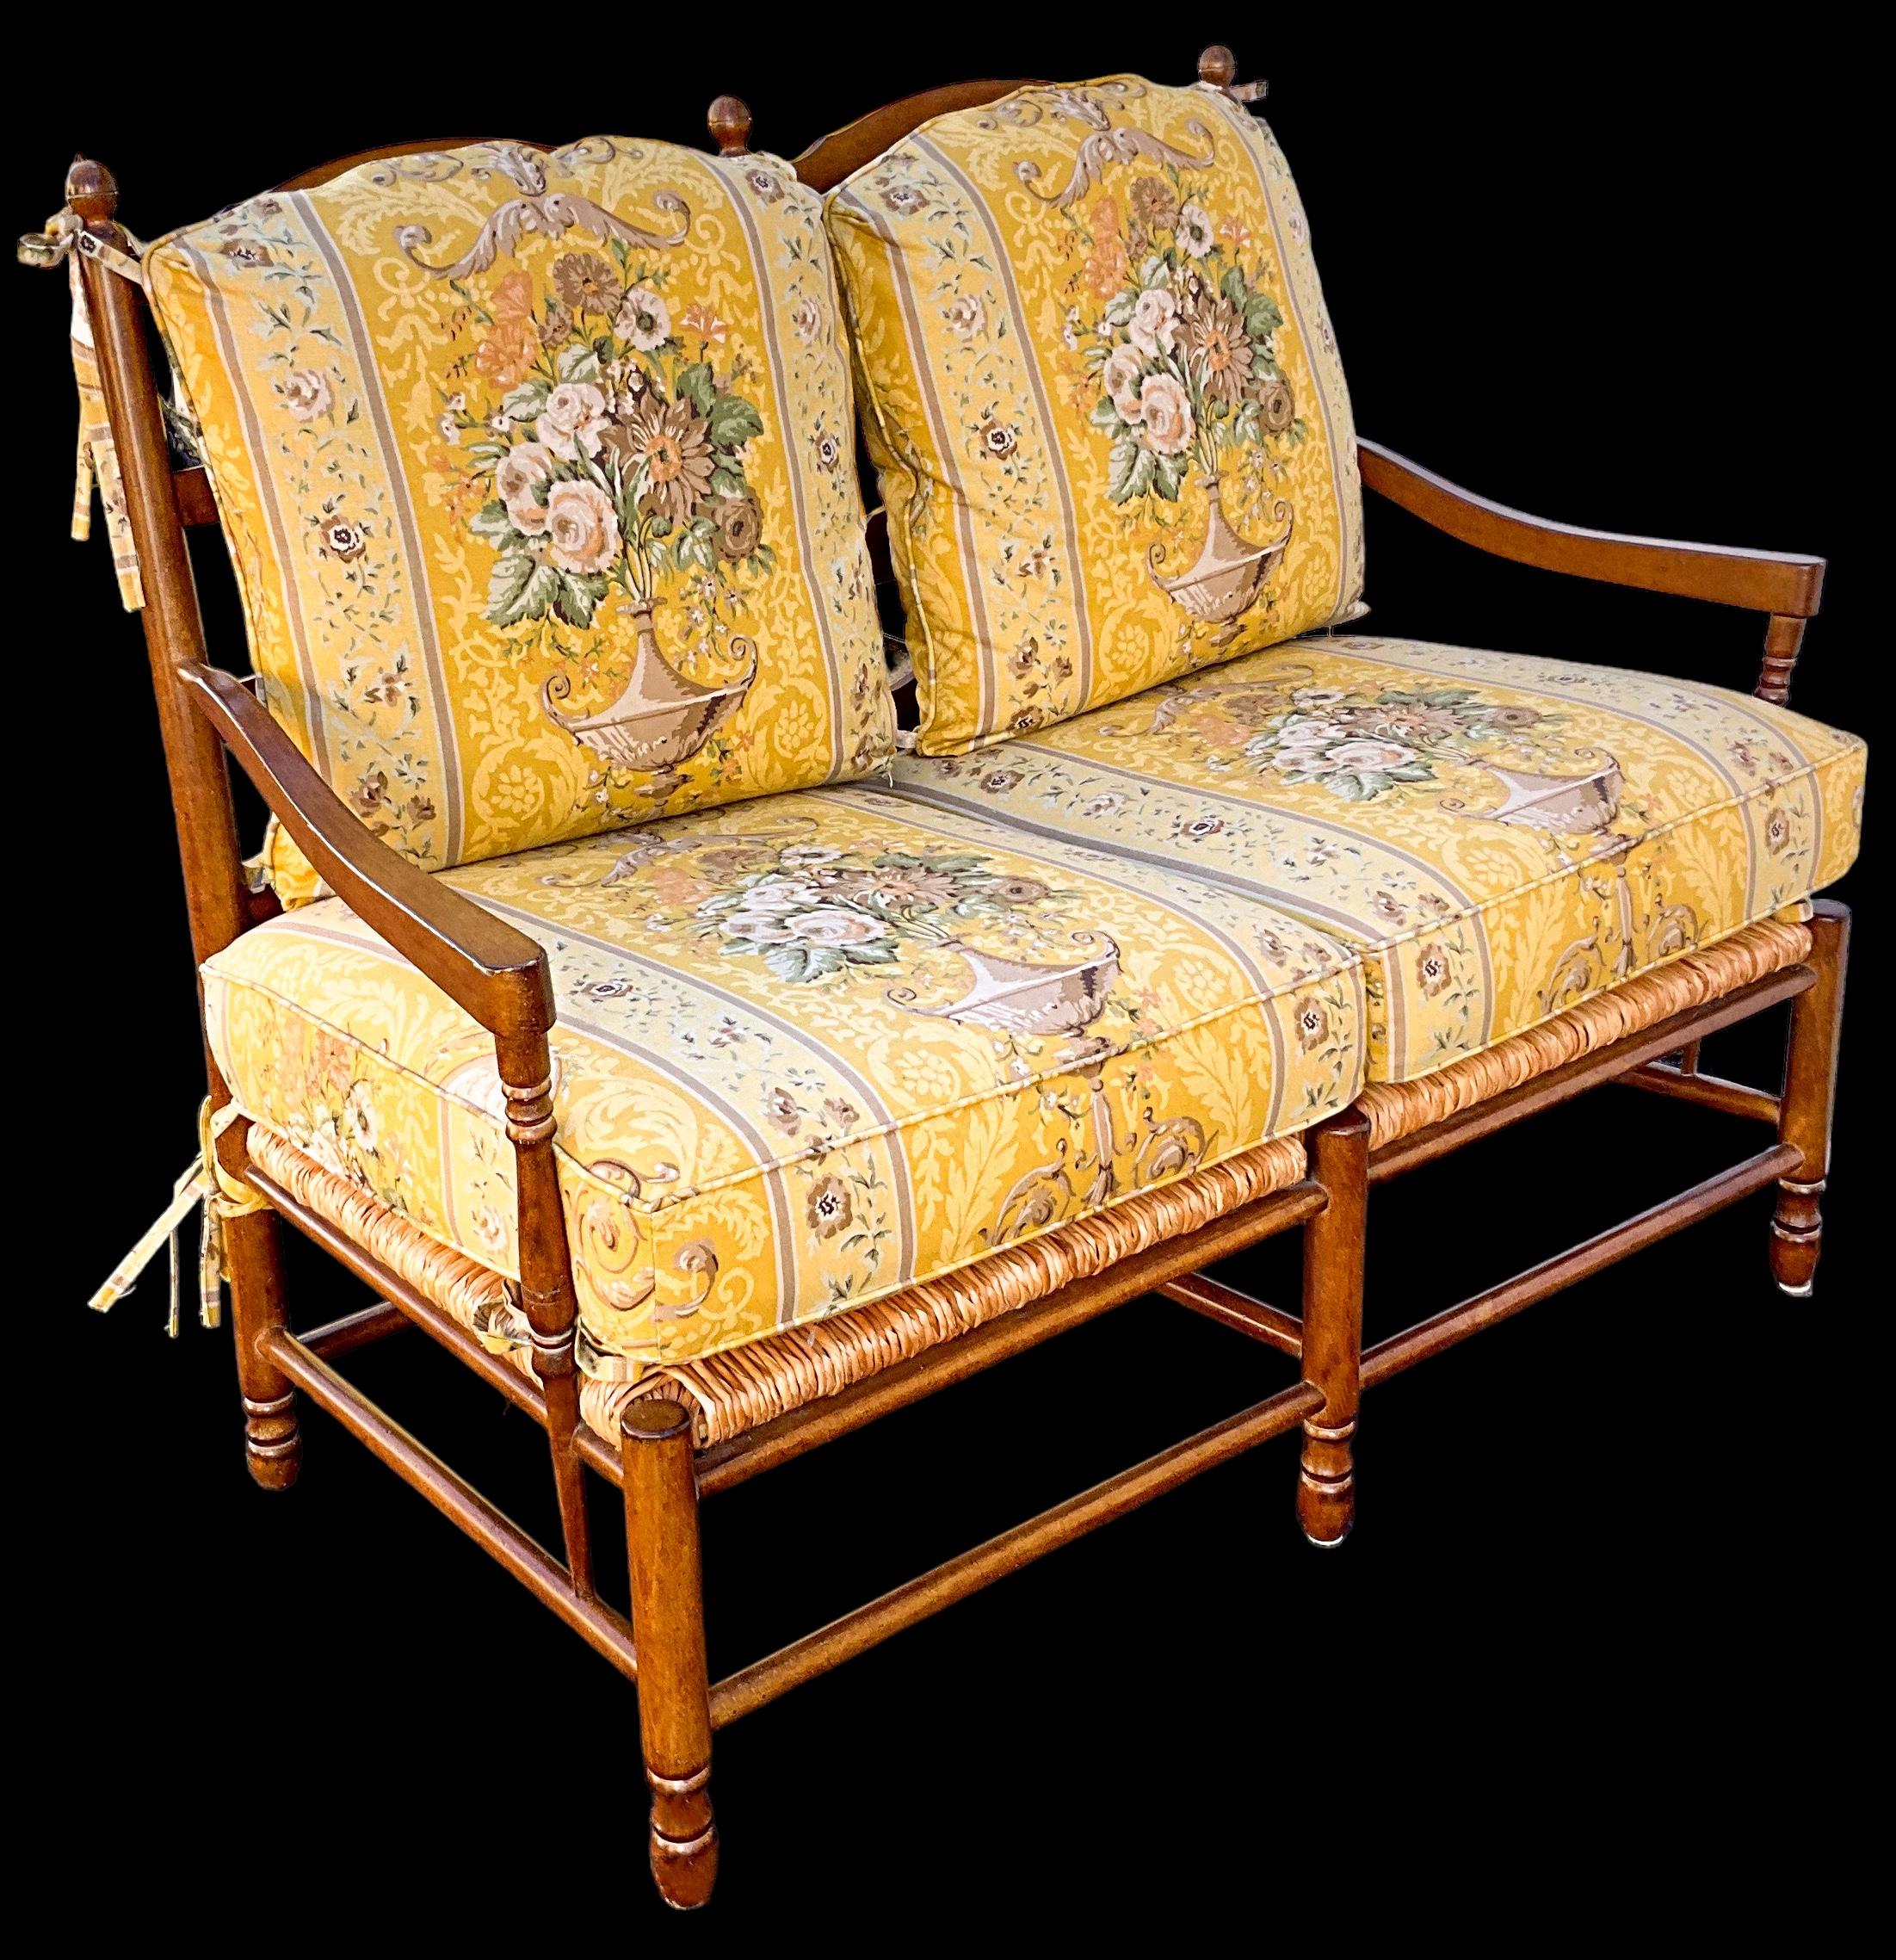 20th Century 20th-C. French Country Carved Maple Settee W/ Rush Seat Att. To Pierre Deux  For Sale